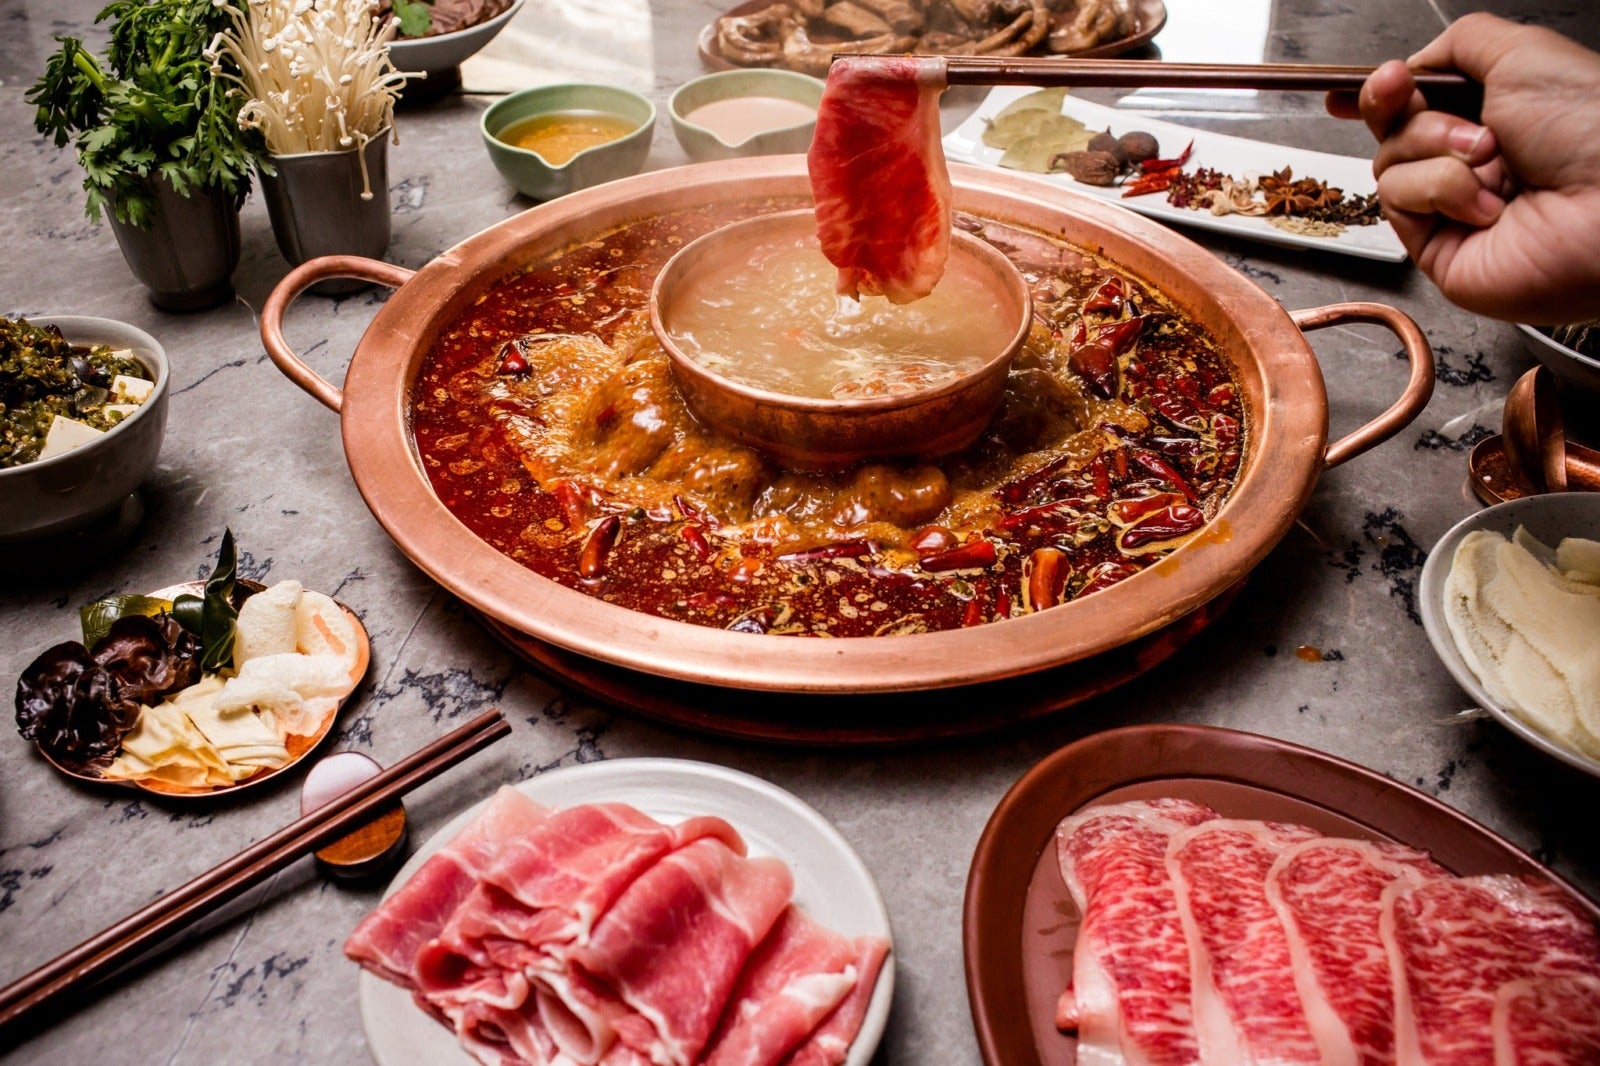 Experts: Hotpot Is Seriously Unhealthy & You Should Only Eat It Once a Month - WORLD OF BUZZ